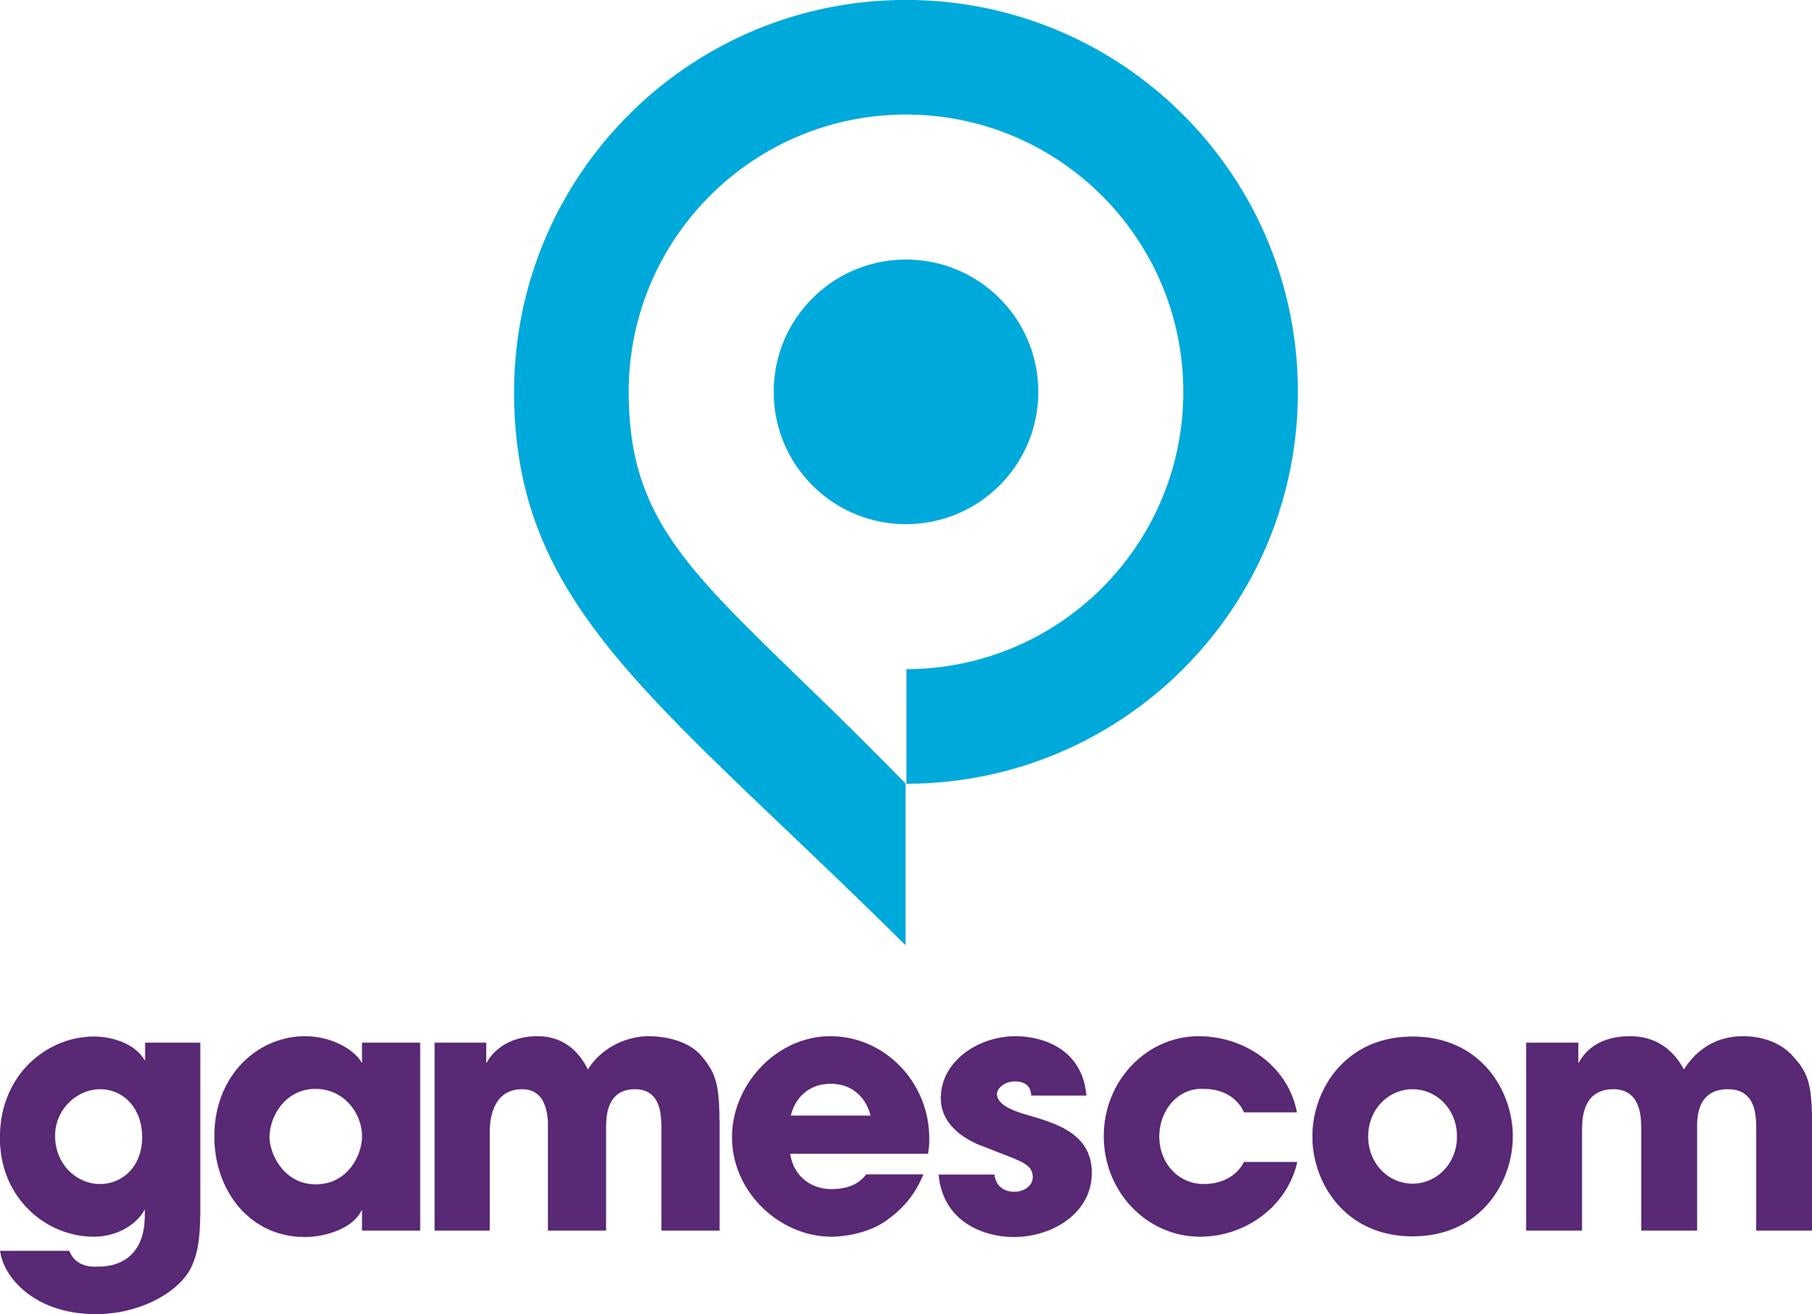 Image for Gamescom 2020 to host 'at least' a digital event in August